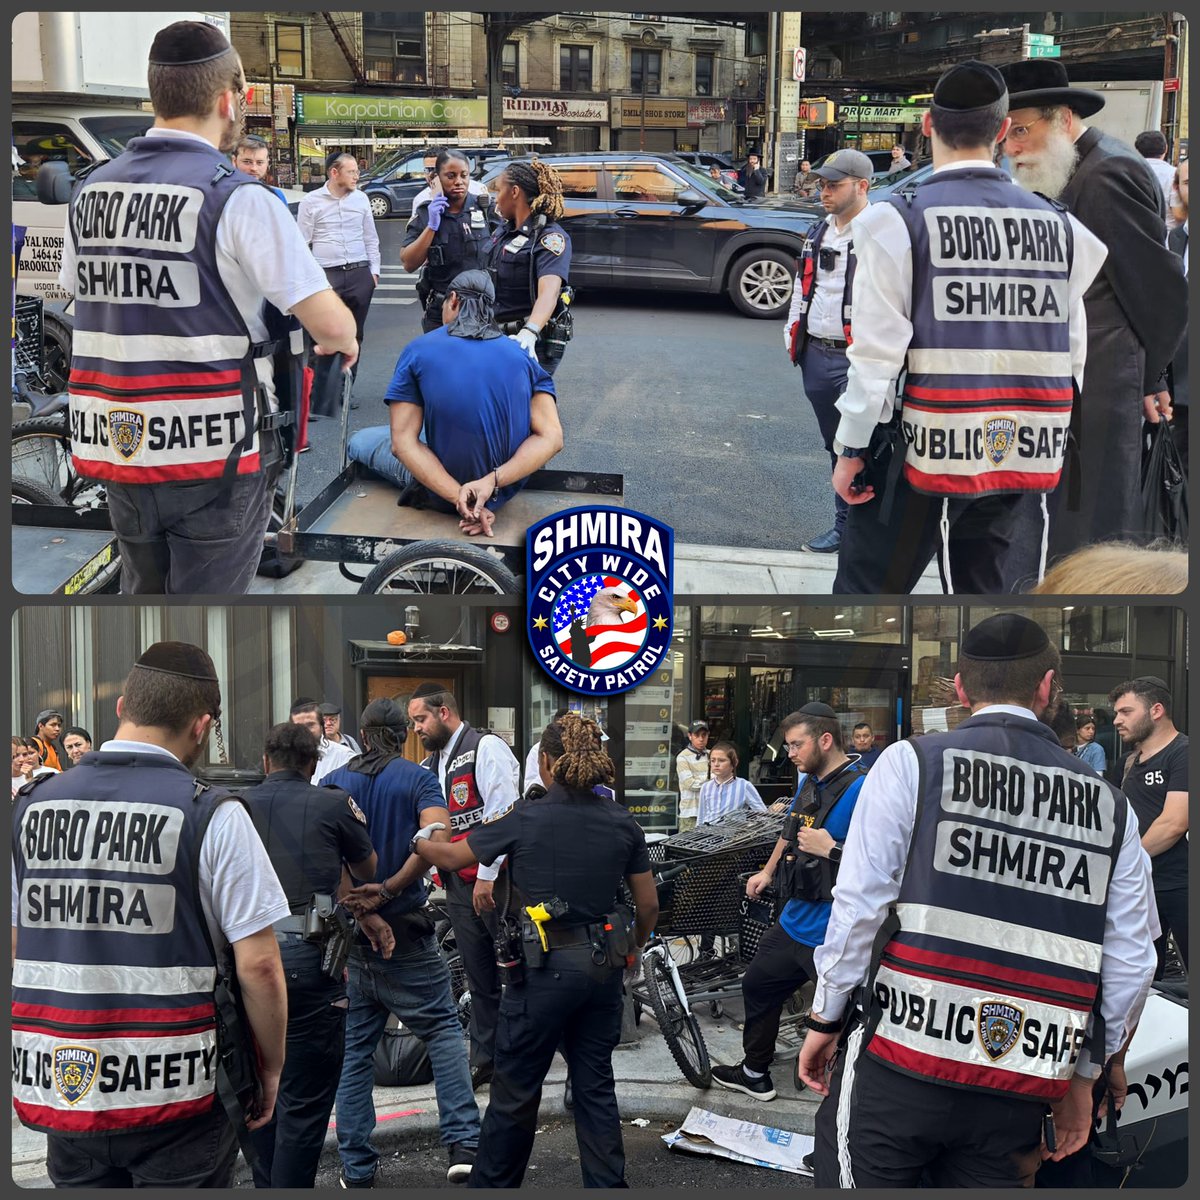 Thanks to the quick response by our #Shmira volunteers responding to a #Hotline call from a local grocery store manager about a male who shoplifted from their store, he was quickly apprehended and subsequently arrested by @NYPD66Pct. #ItsWhatWeDo #AnsweringAndResponding